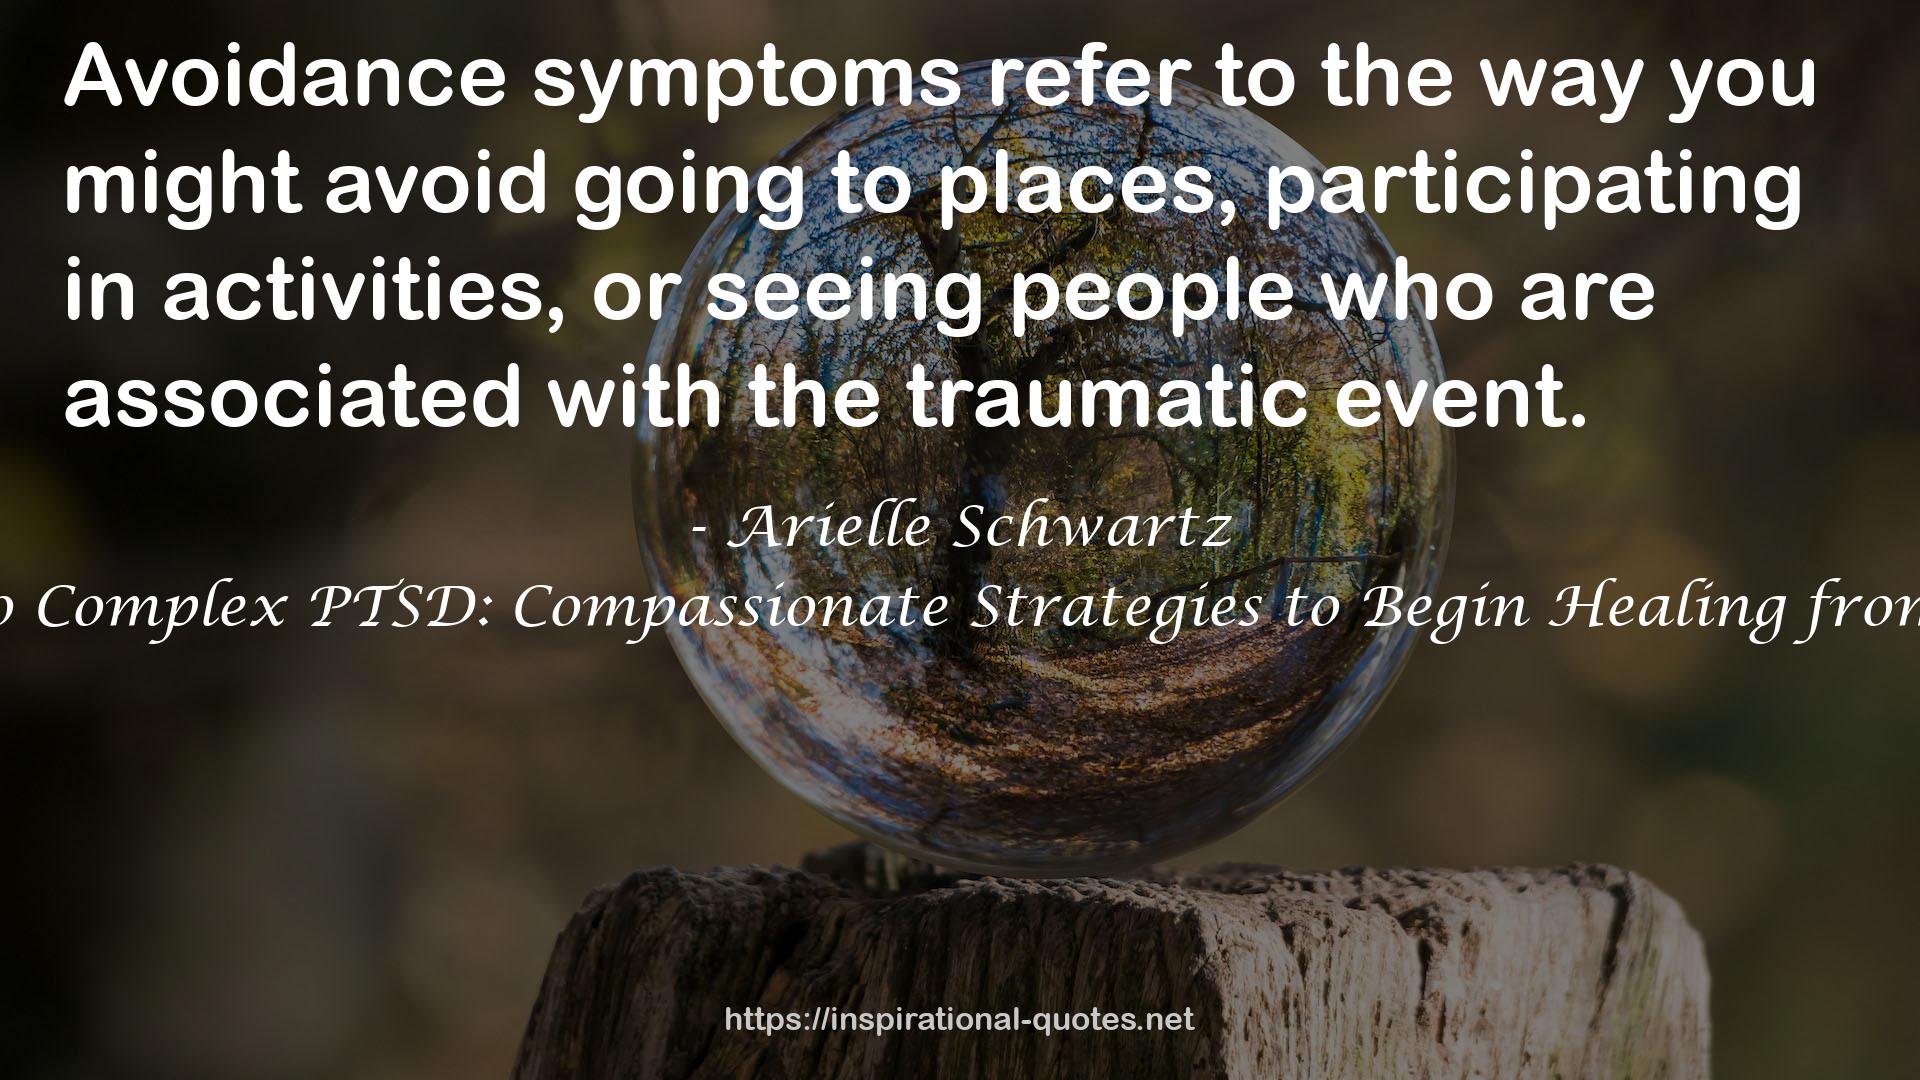 A Practical Guide to Complex PTSD: Compassionate Strategies to Begin Healing from Childhood Trauma QUOTES